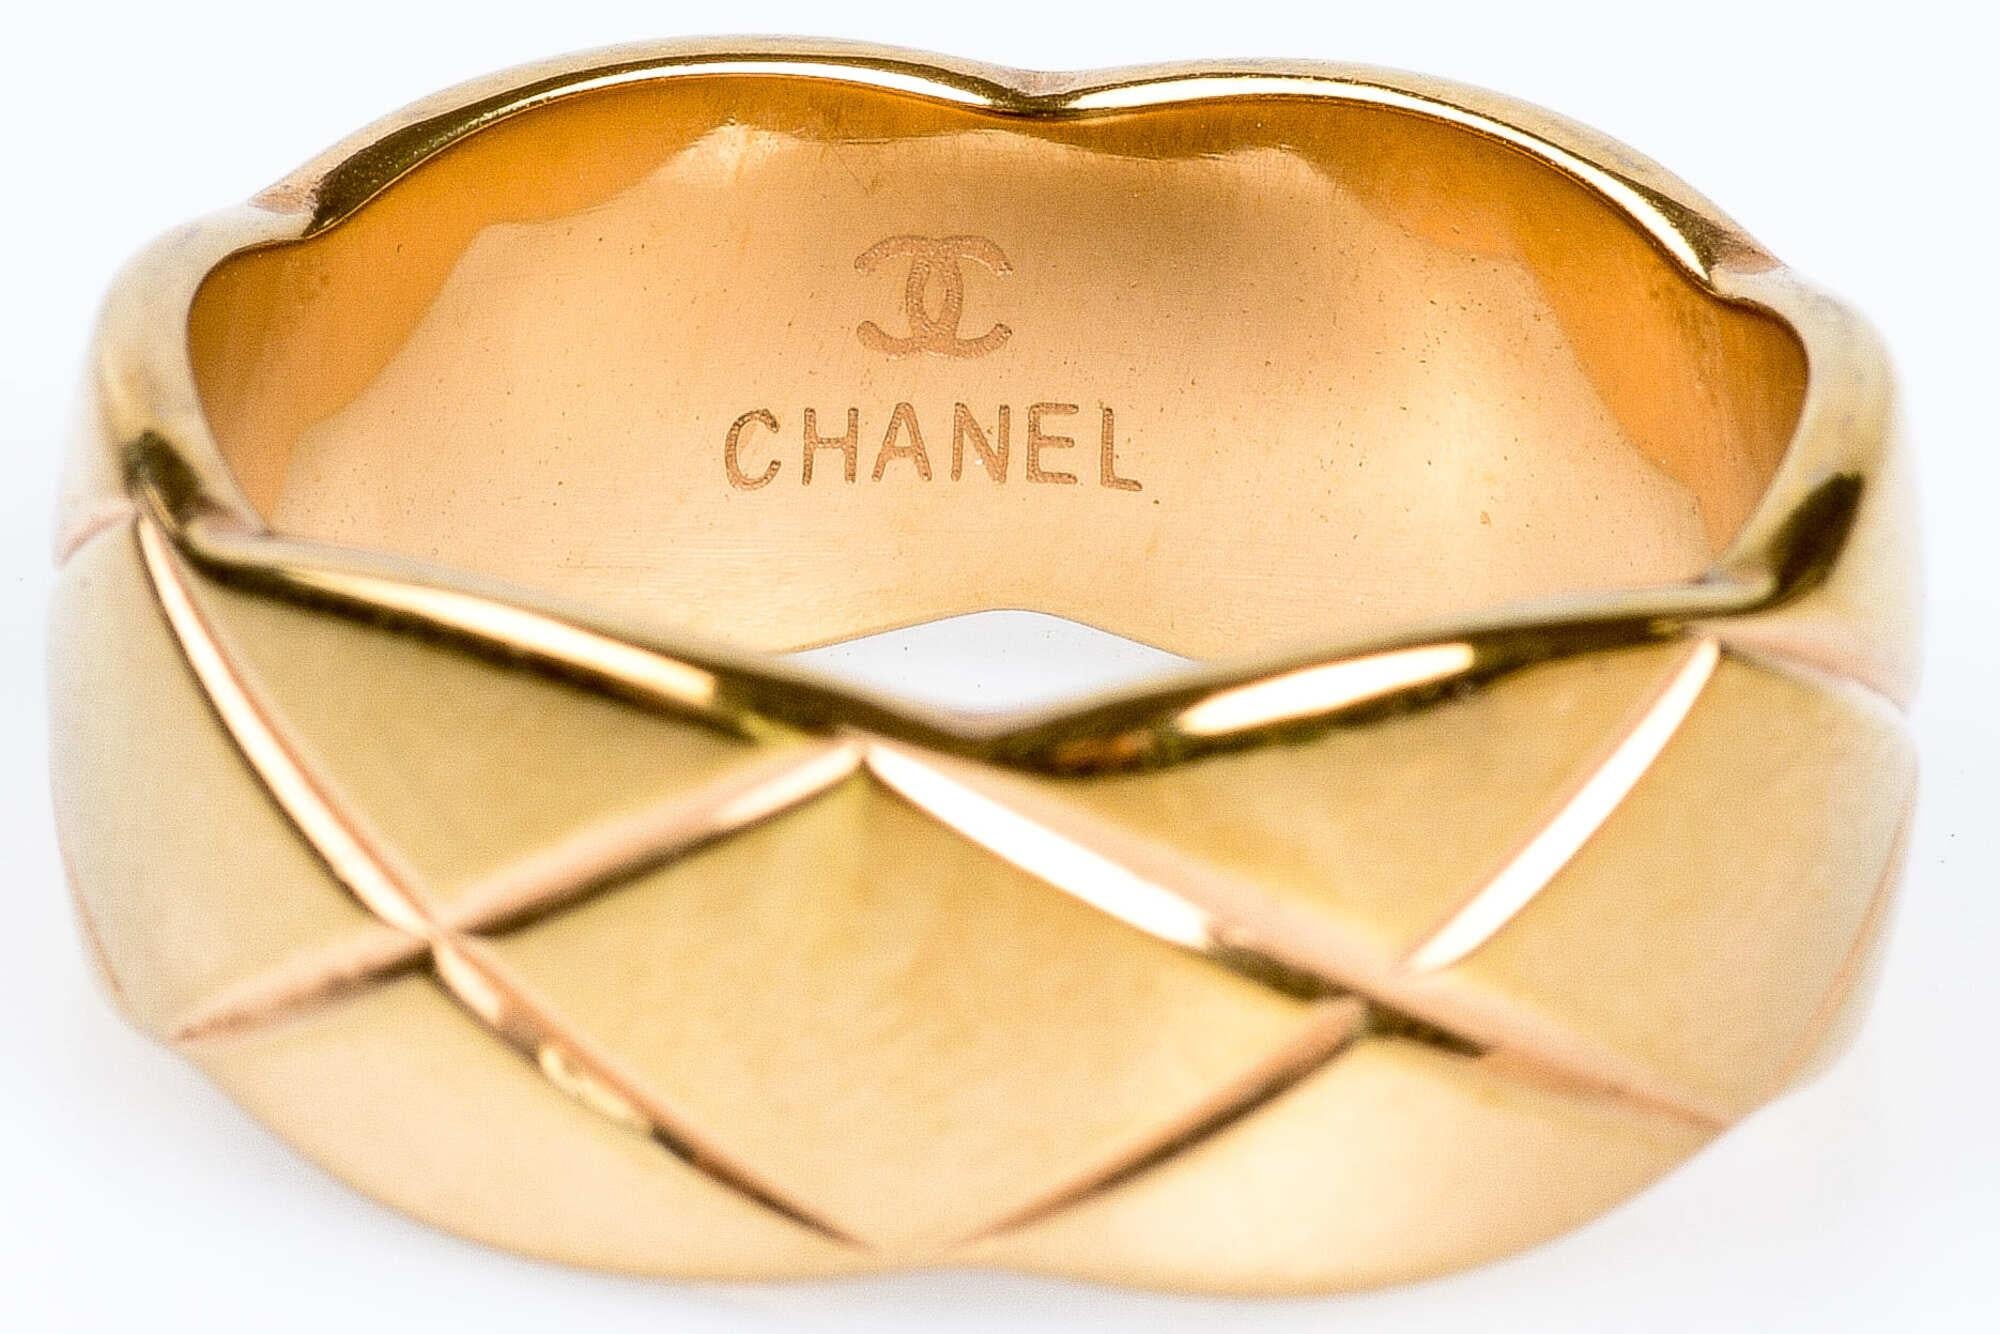 Women's or Men's Coco Crush model ring by CHANEL in 18k yellow gold 